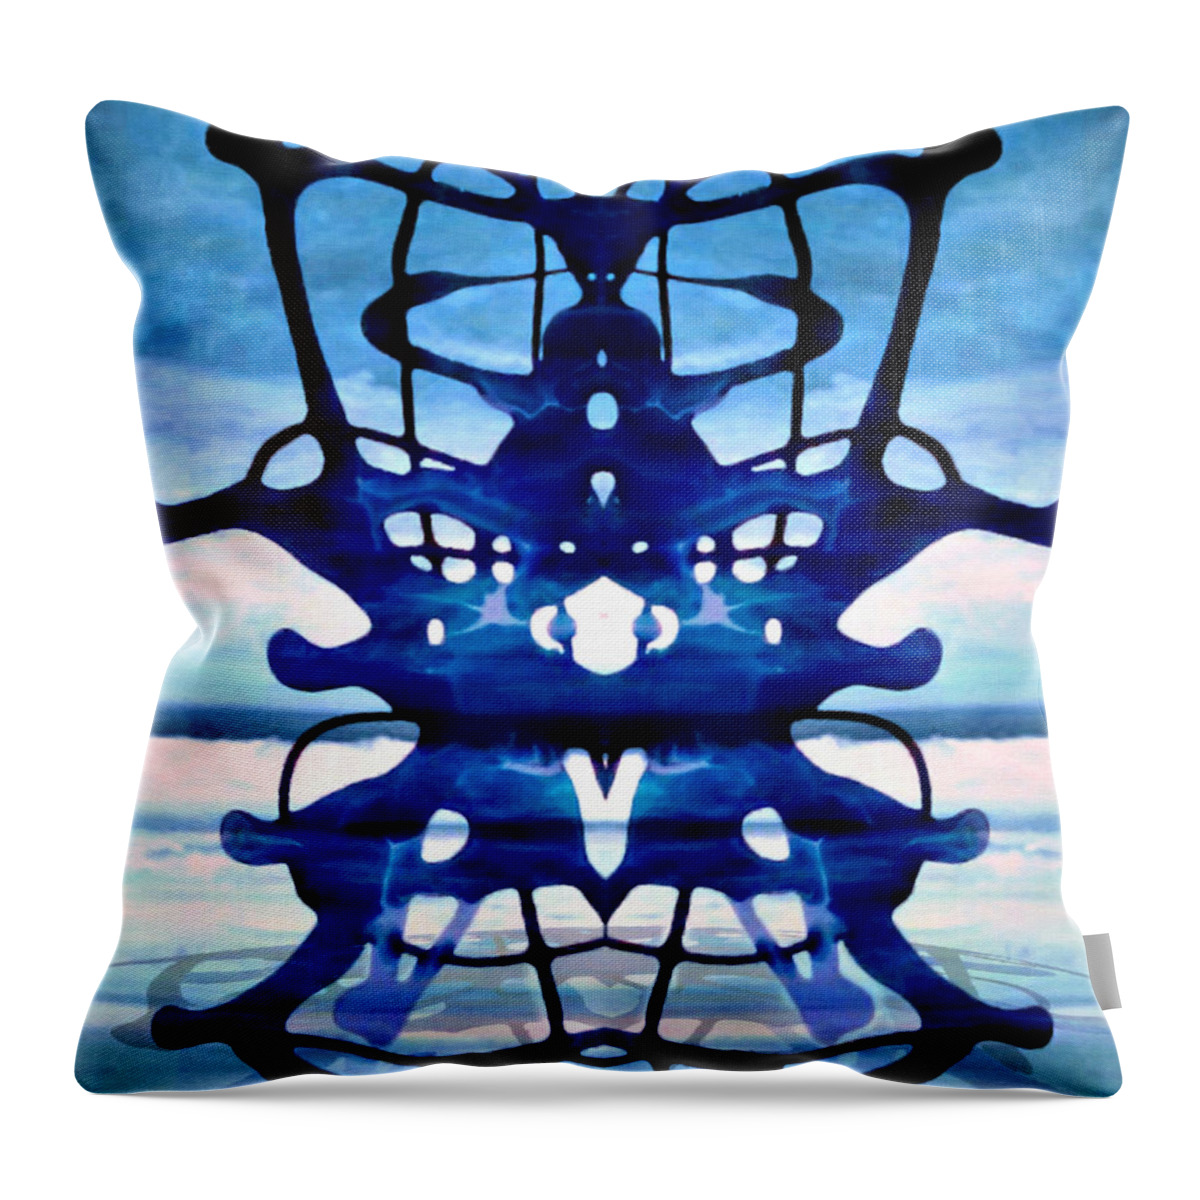 Blue Throw Pillow featuring the digital art The Hierophant by Amy Shaw